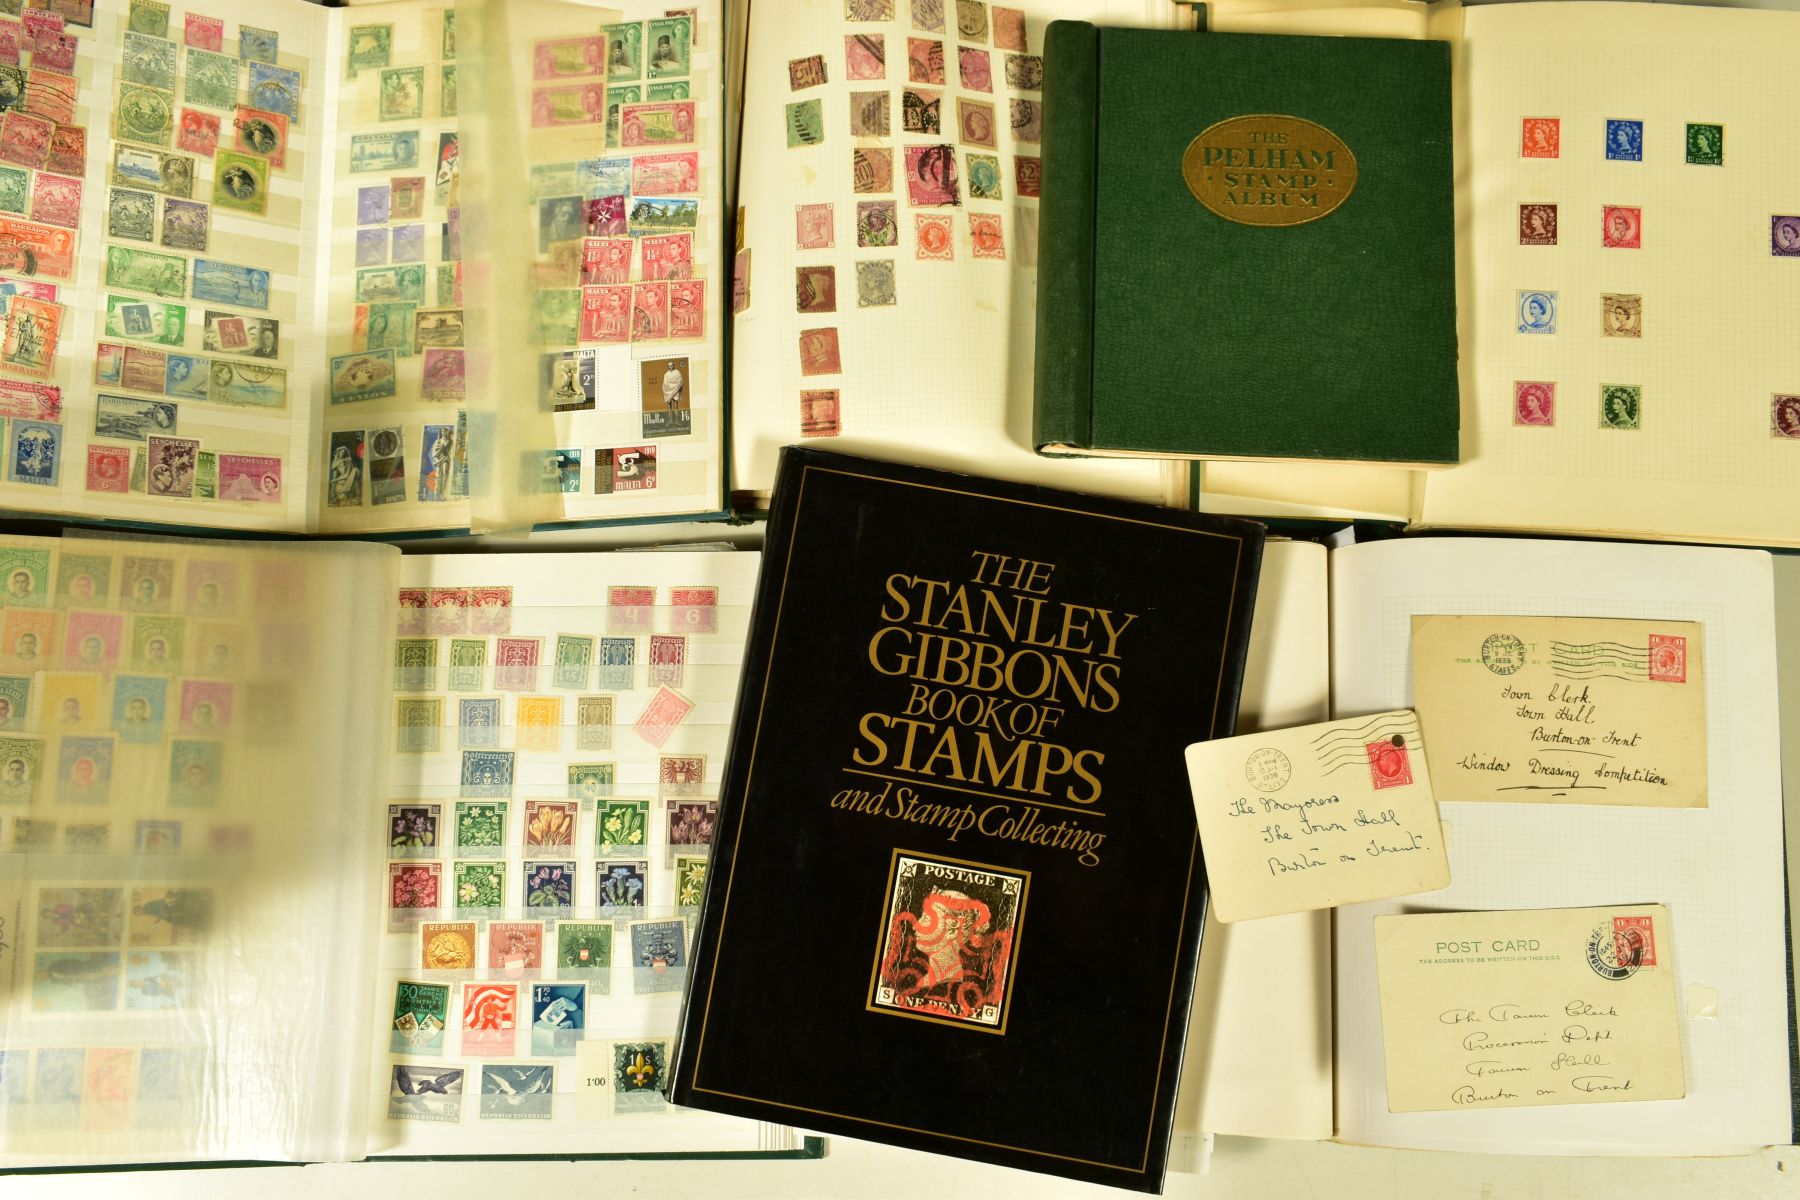 A LARGE COLLECTION OF STAMPS in albums, note a commonwealth collection with Malta 1956 set mint, - Image 2 of 7